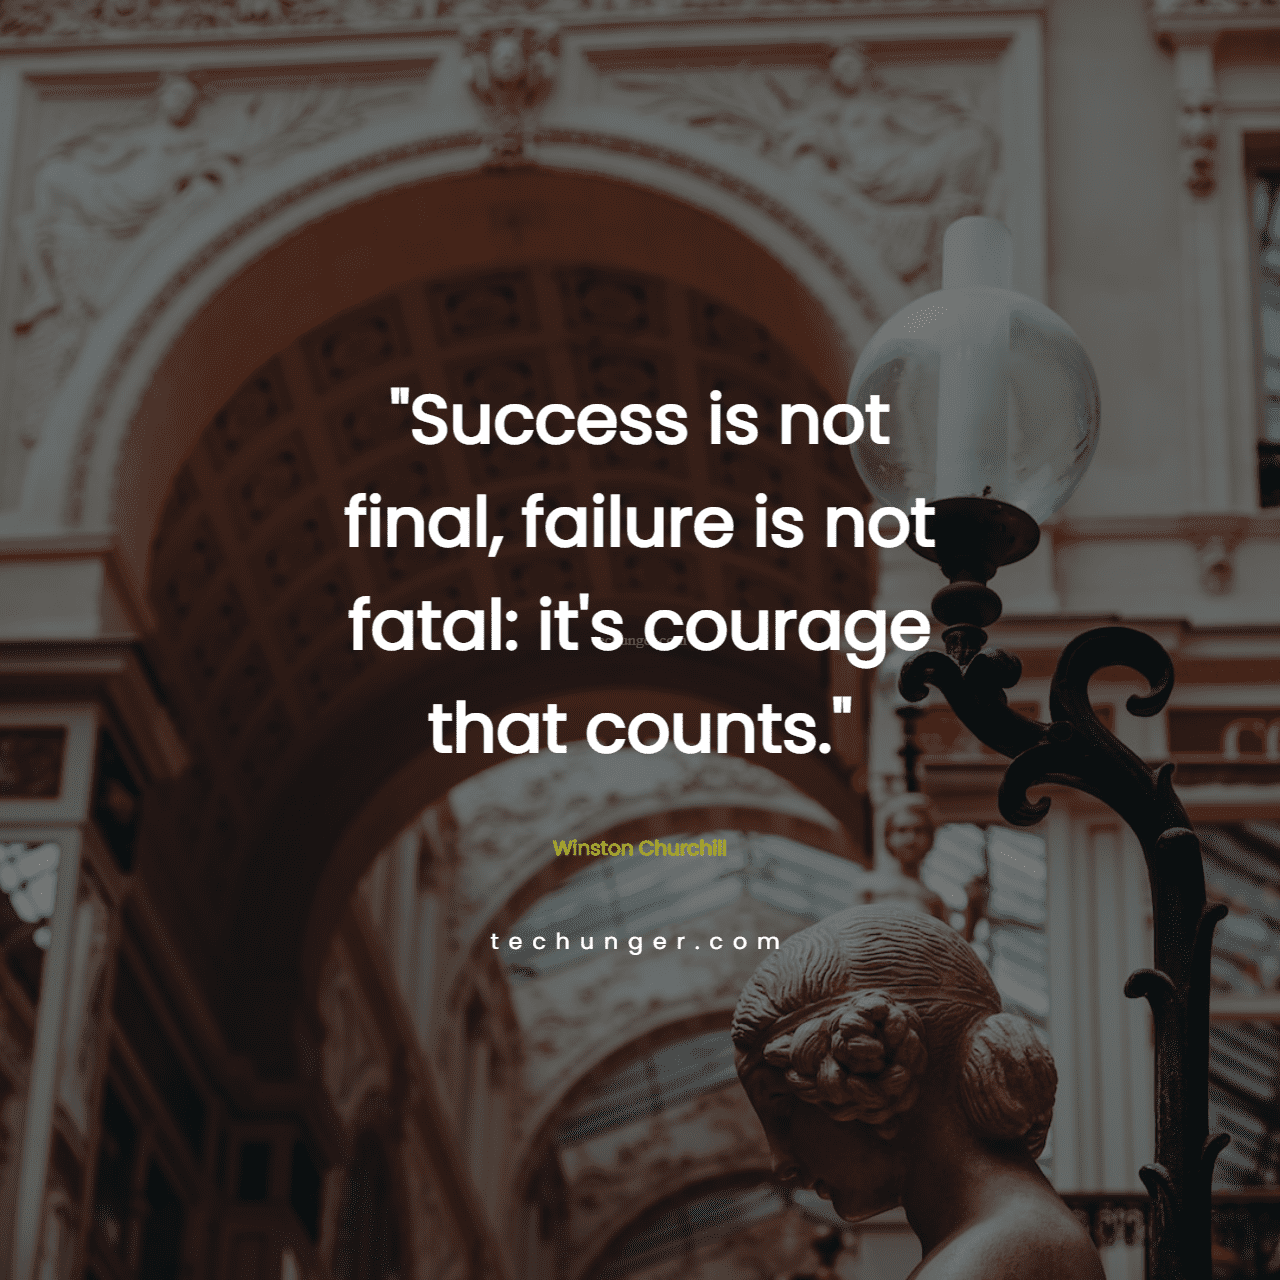 motivational,inspirational,quotes,Success is not final, failure is not fatal: it's courage that counts.
Winston Churchill